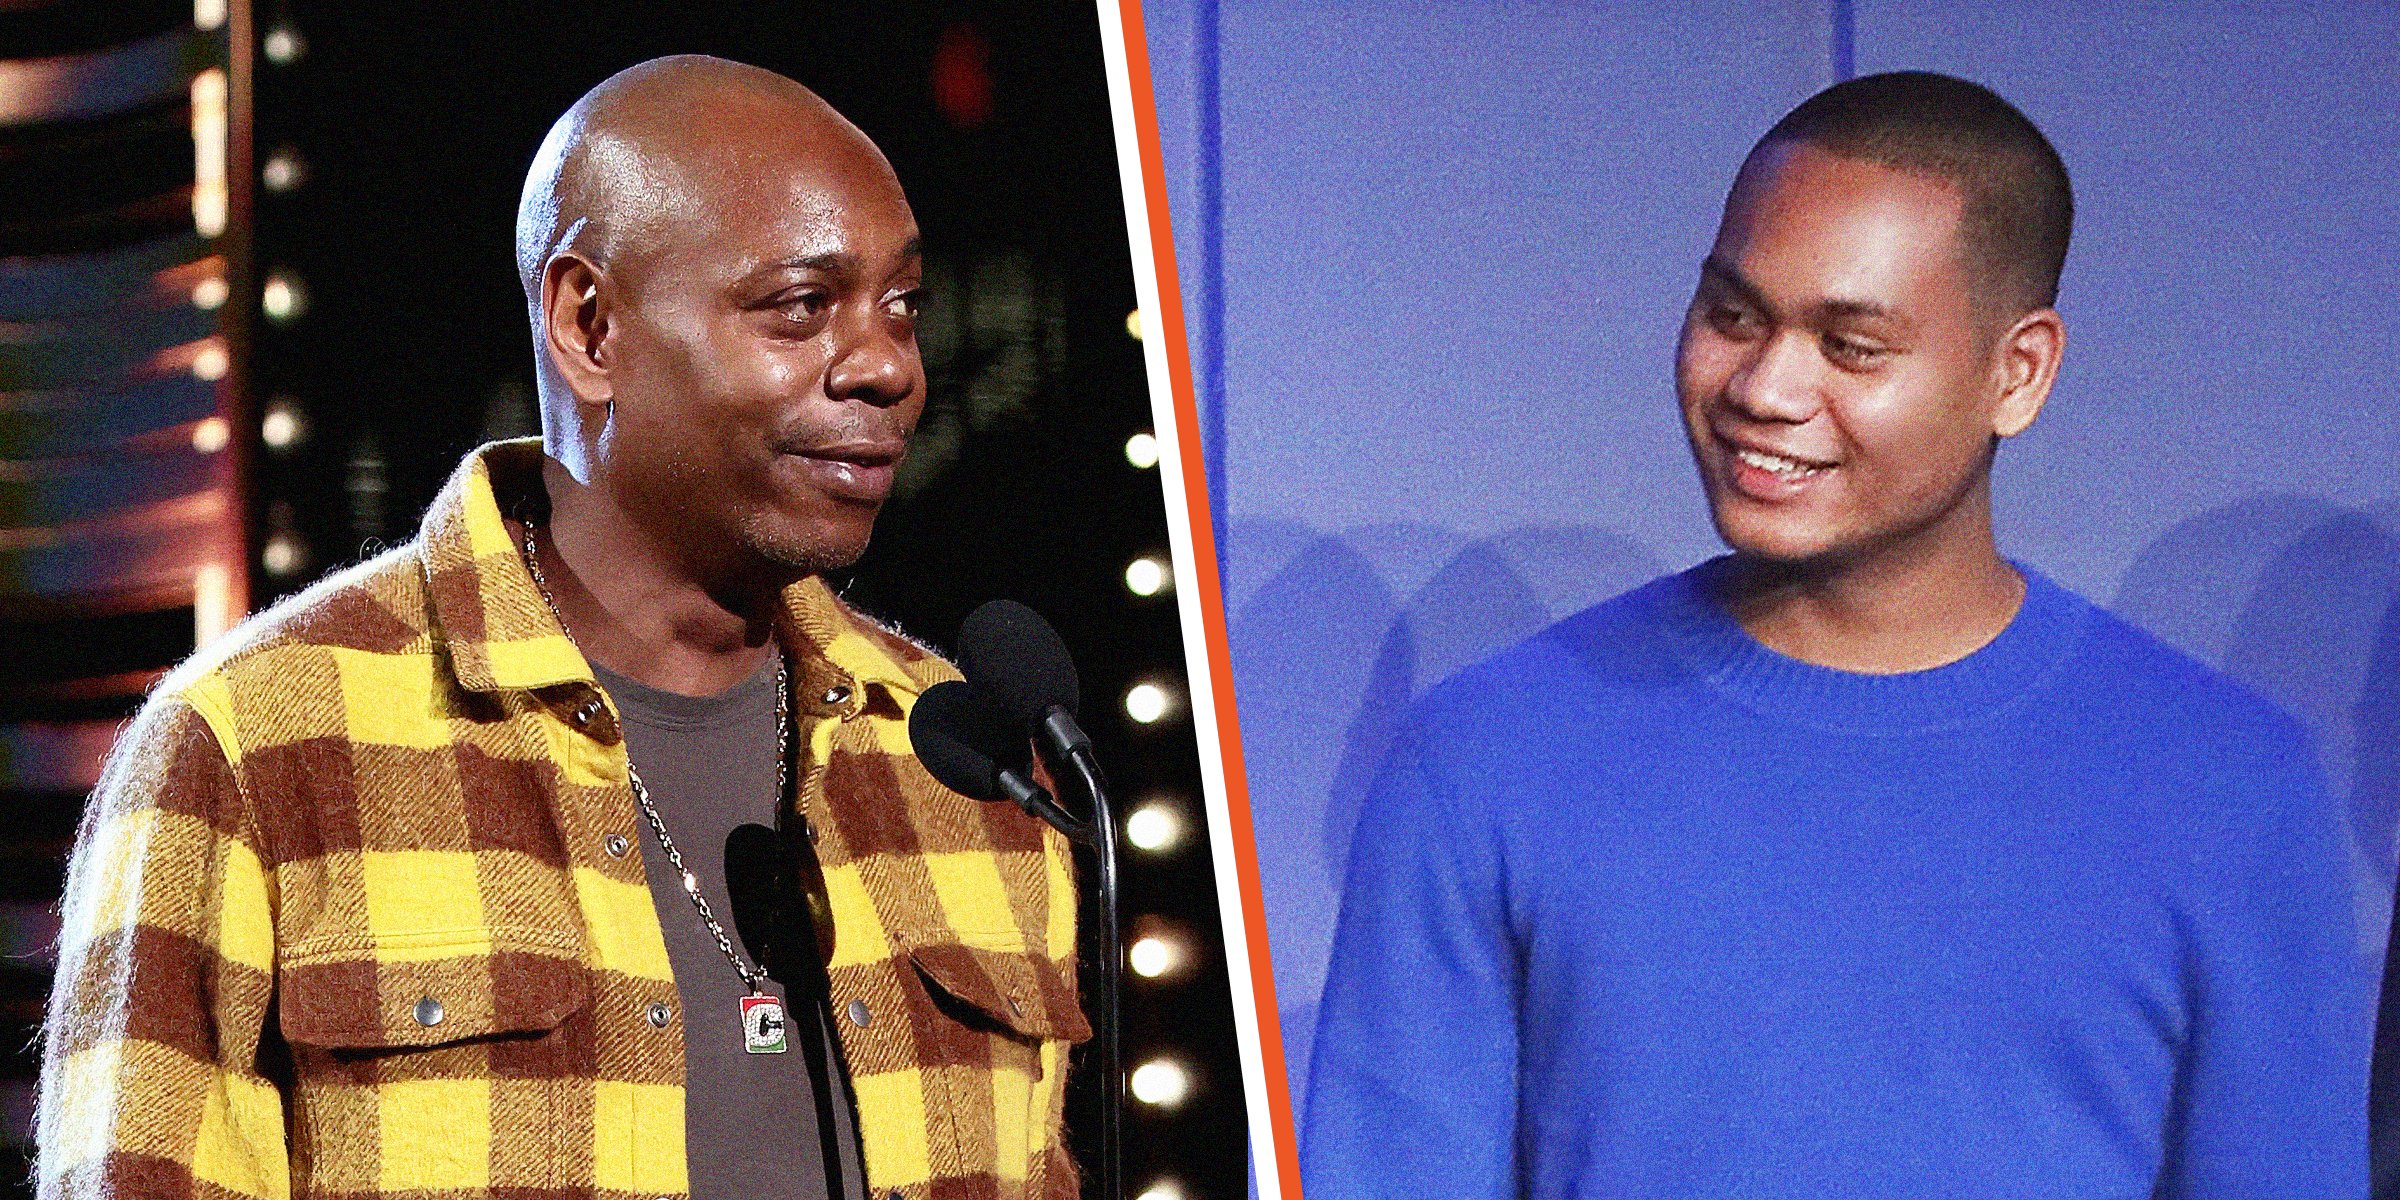 Dave Chappelle and his son Ibrahim. | Source: Getty Images